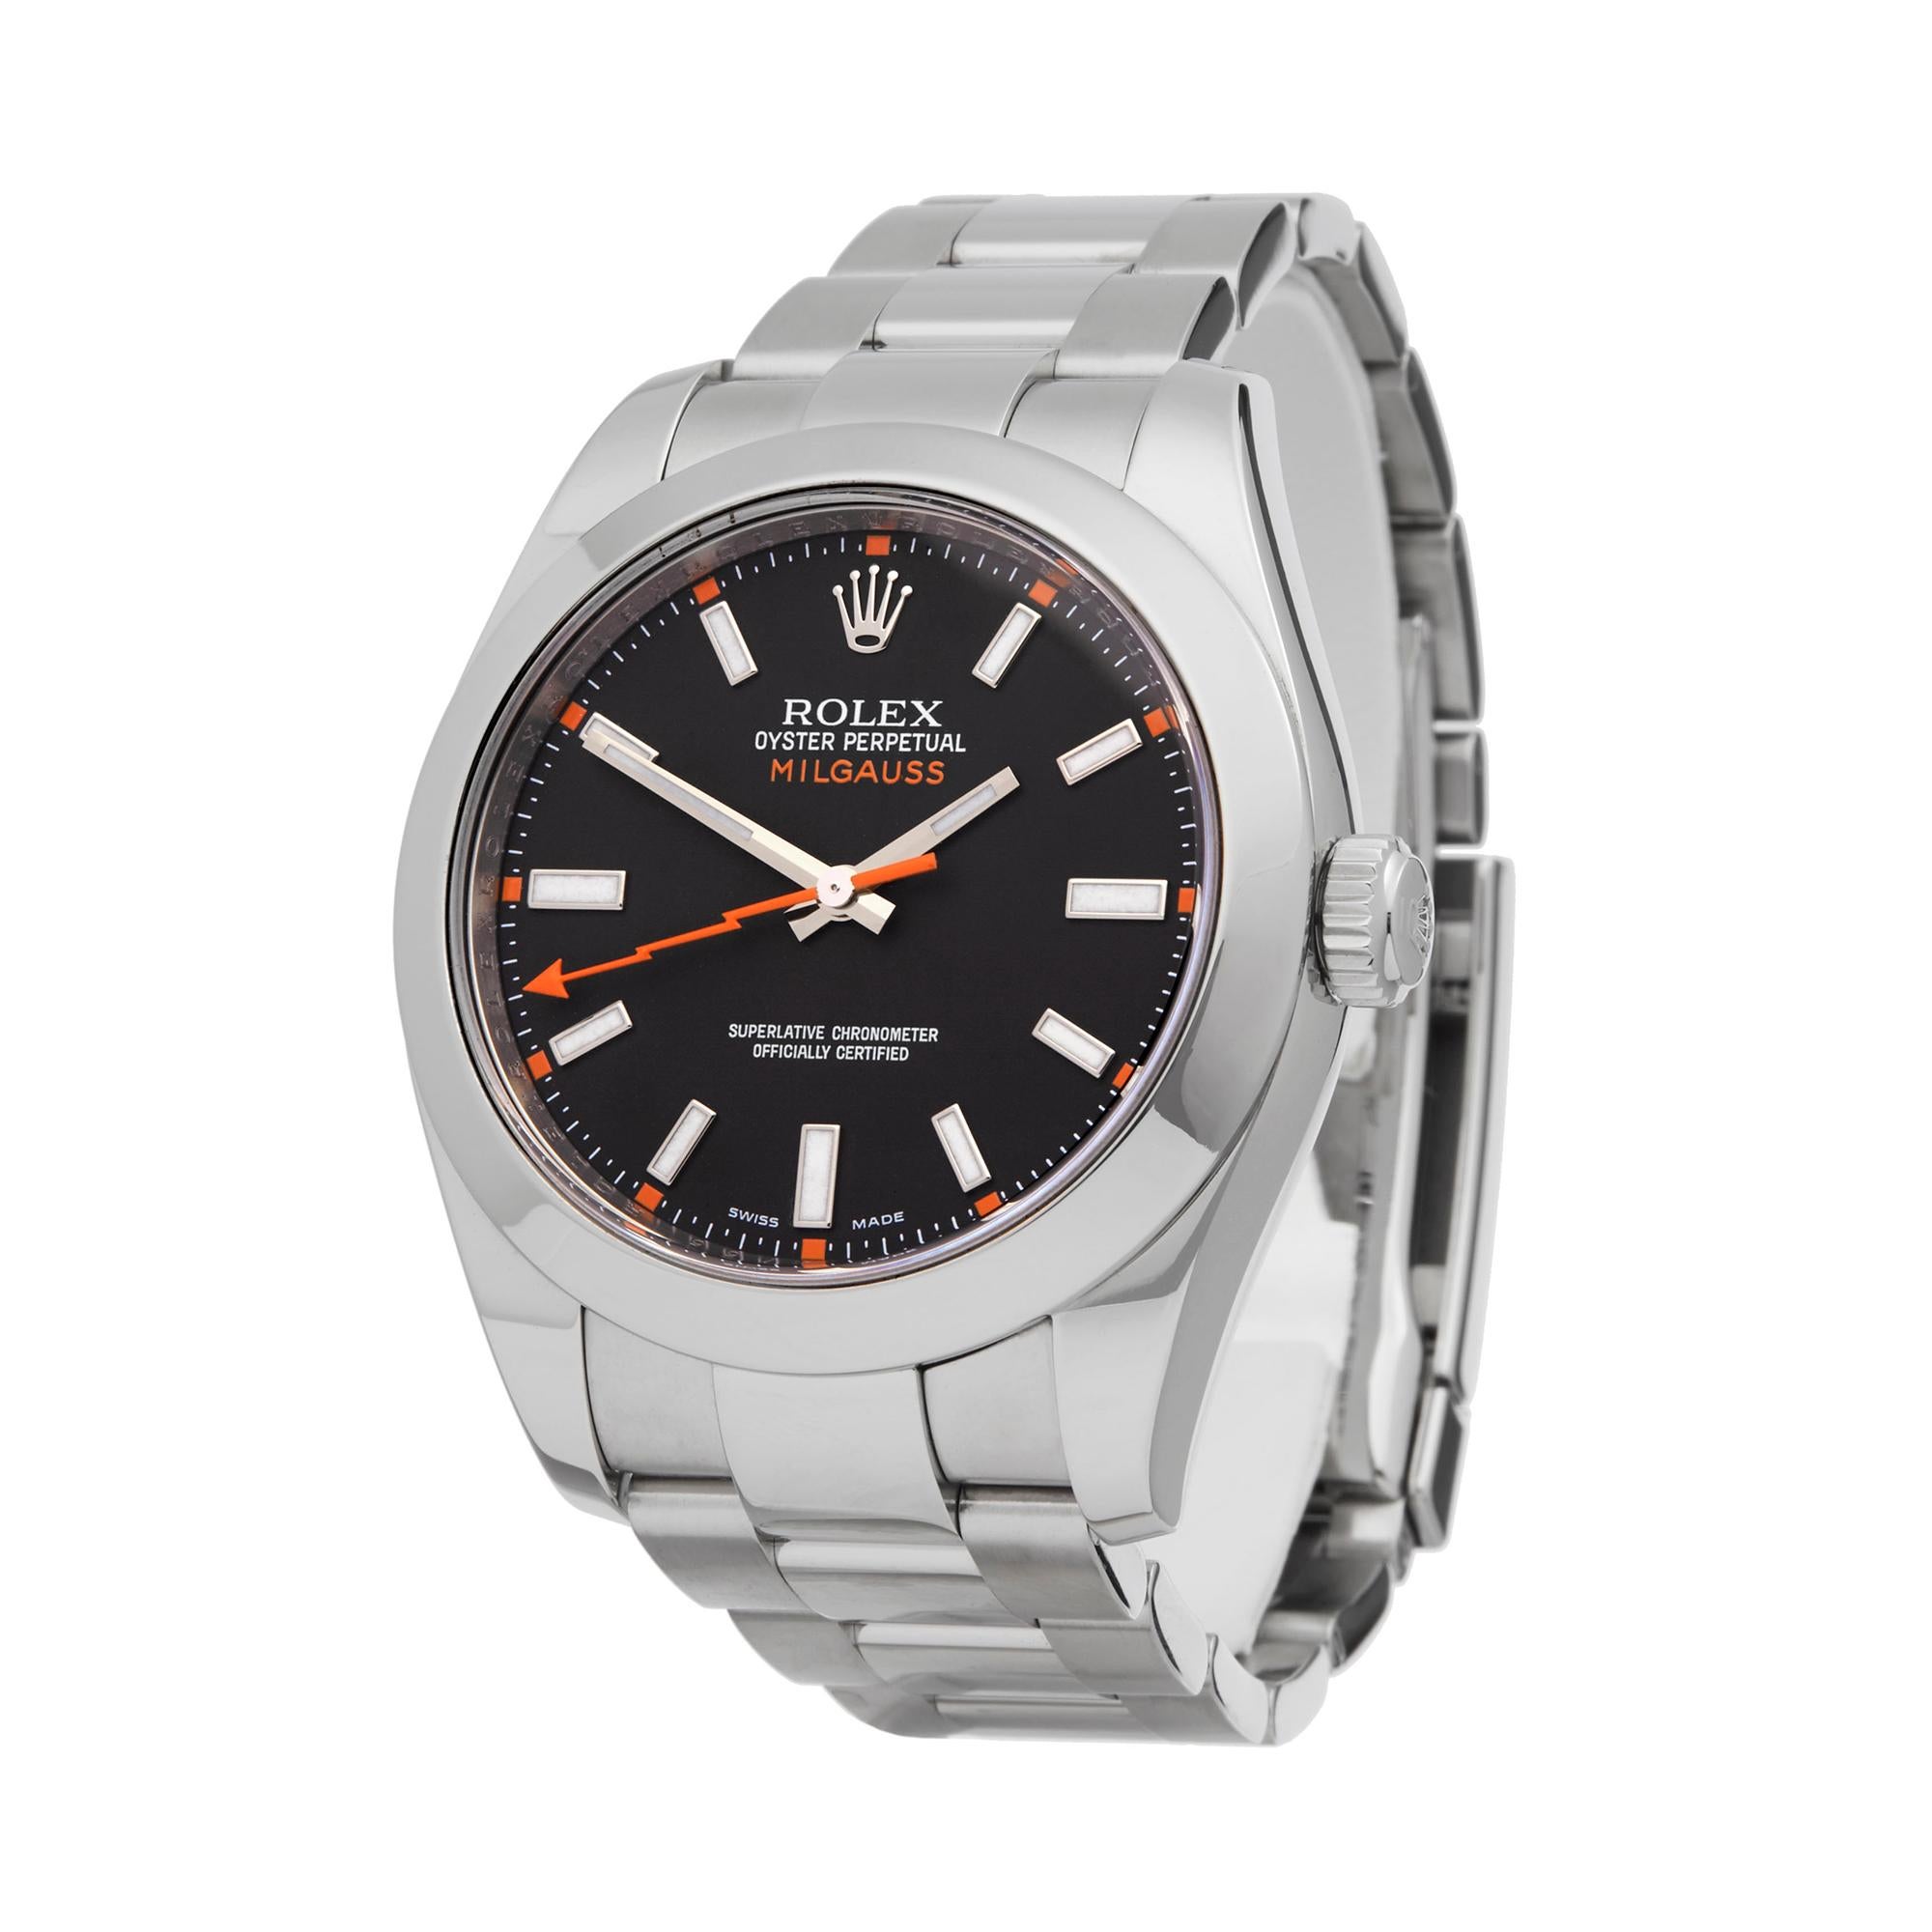 Ref: W6294
Manufacturer: Rolex
Model: Milgauss
Model Ref: 116400
Age: 22nd June 2011
Gender: Mens
Complete With: Box & Guarantee
Dial: Black Baton
Glass: Sapphire Crystal
Movement: Automatic
Water Resistance: To Manufacturers Specifications
Case: